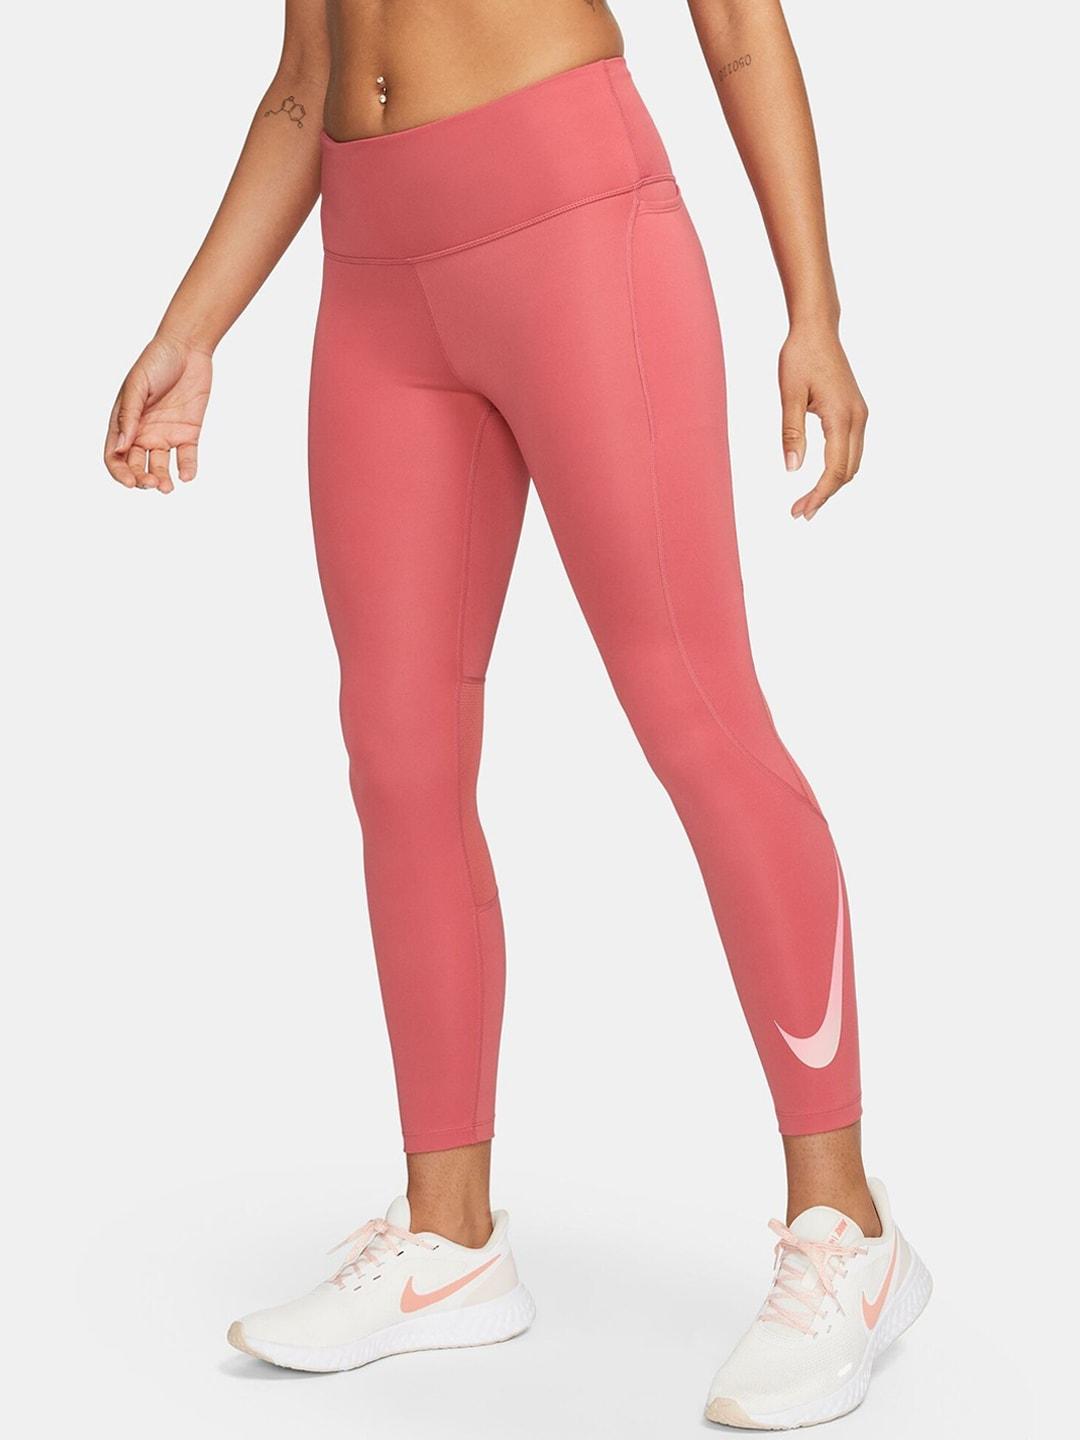 nike-fast-slim-fit-ankle-length-mid-rise-7/8-running-sports-tights-with-pockets